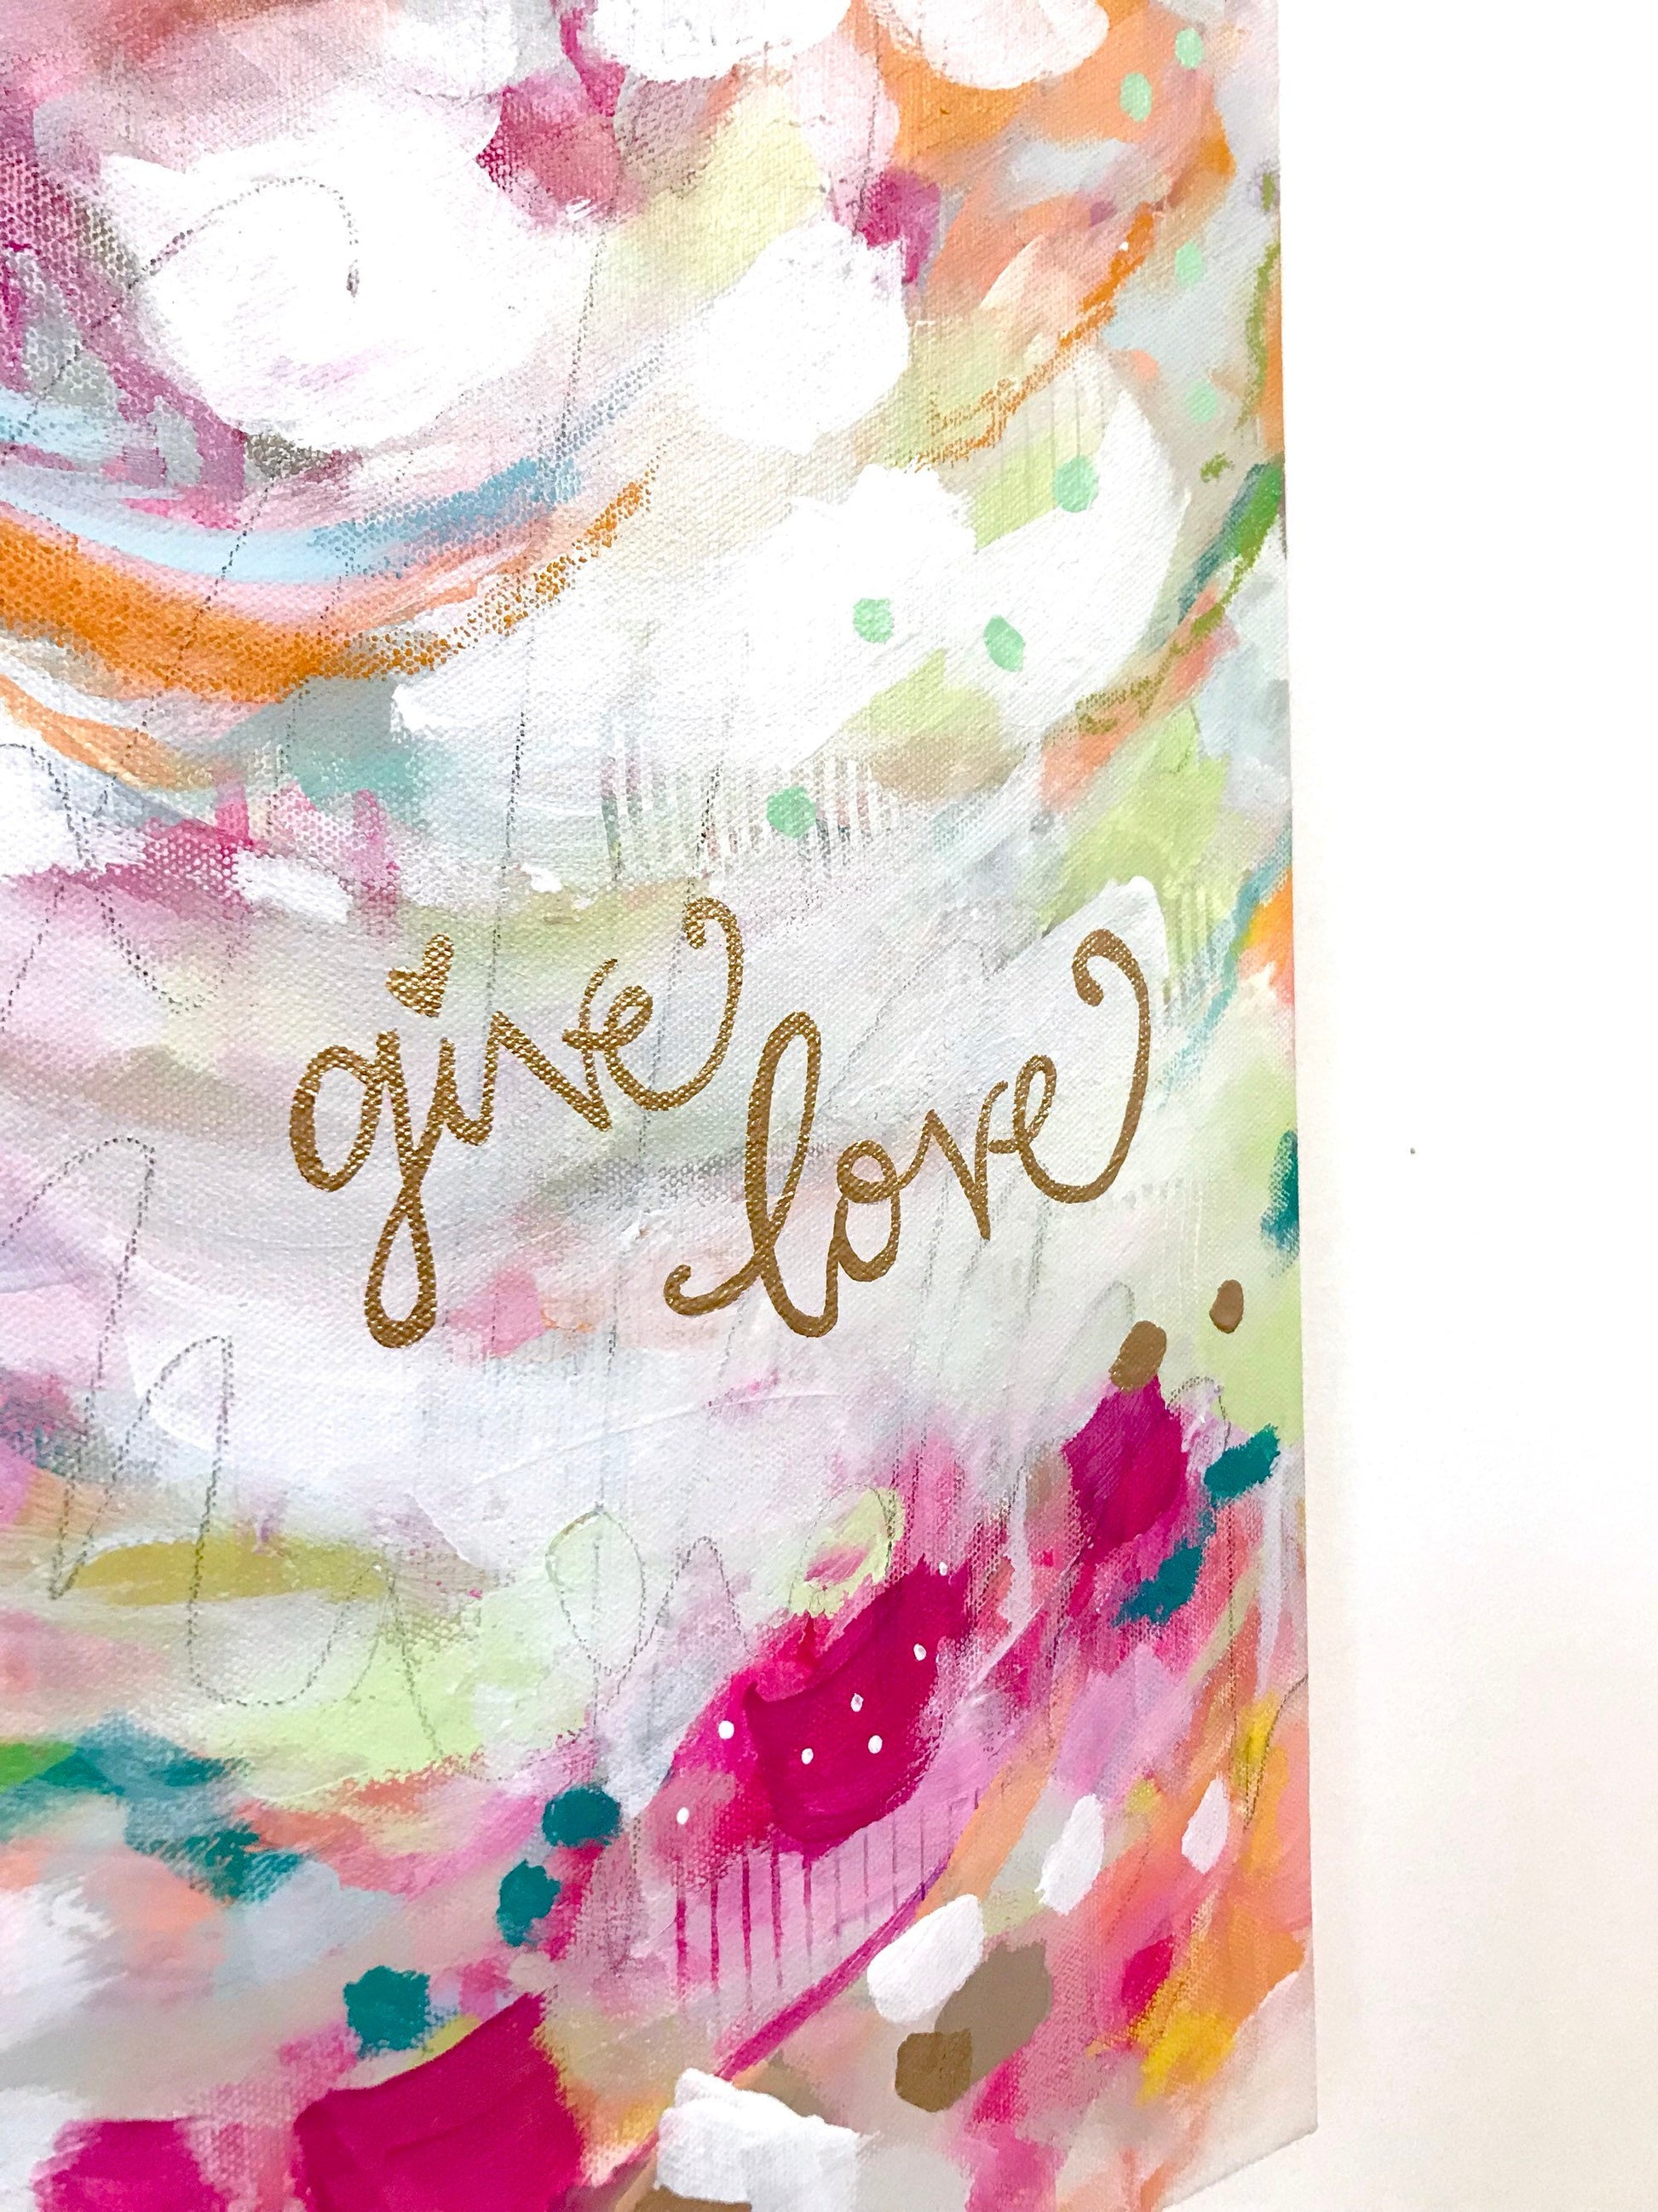 Give Love Original Abstract Painting on 16x20 inch canvas / Colorful Art for the Home / Gold Accents / Shiny Gold Words / Vibrant Home Decor - Bethany Joy Art